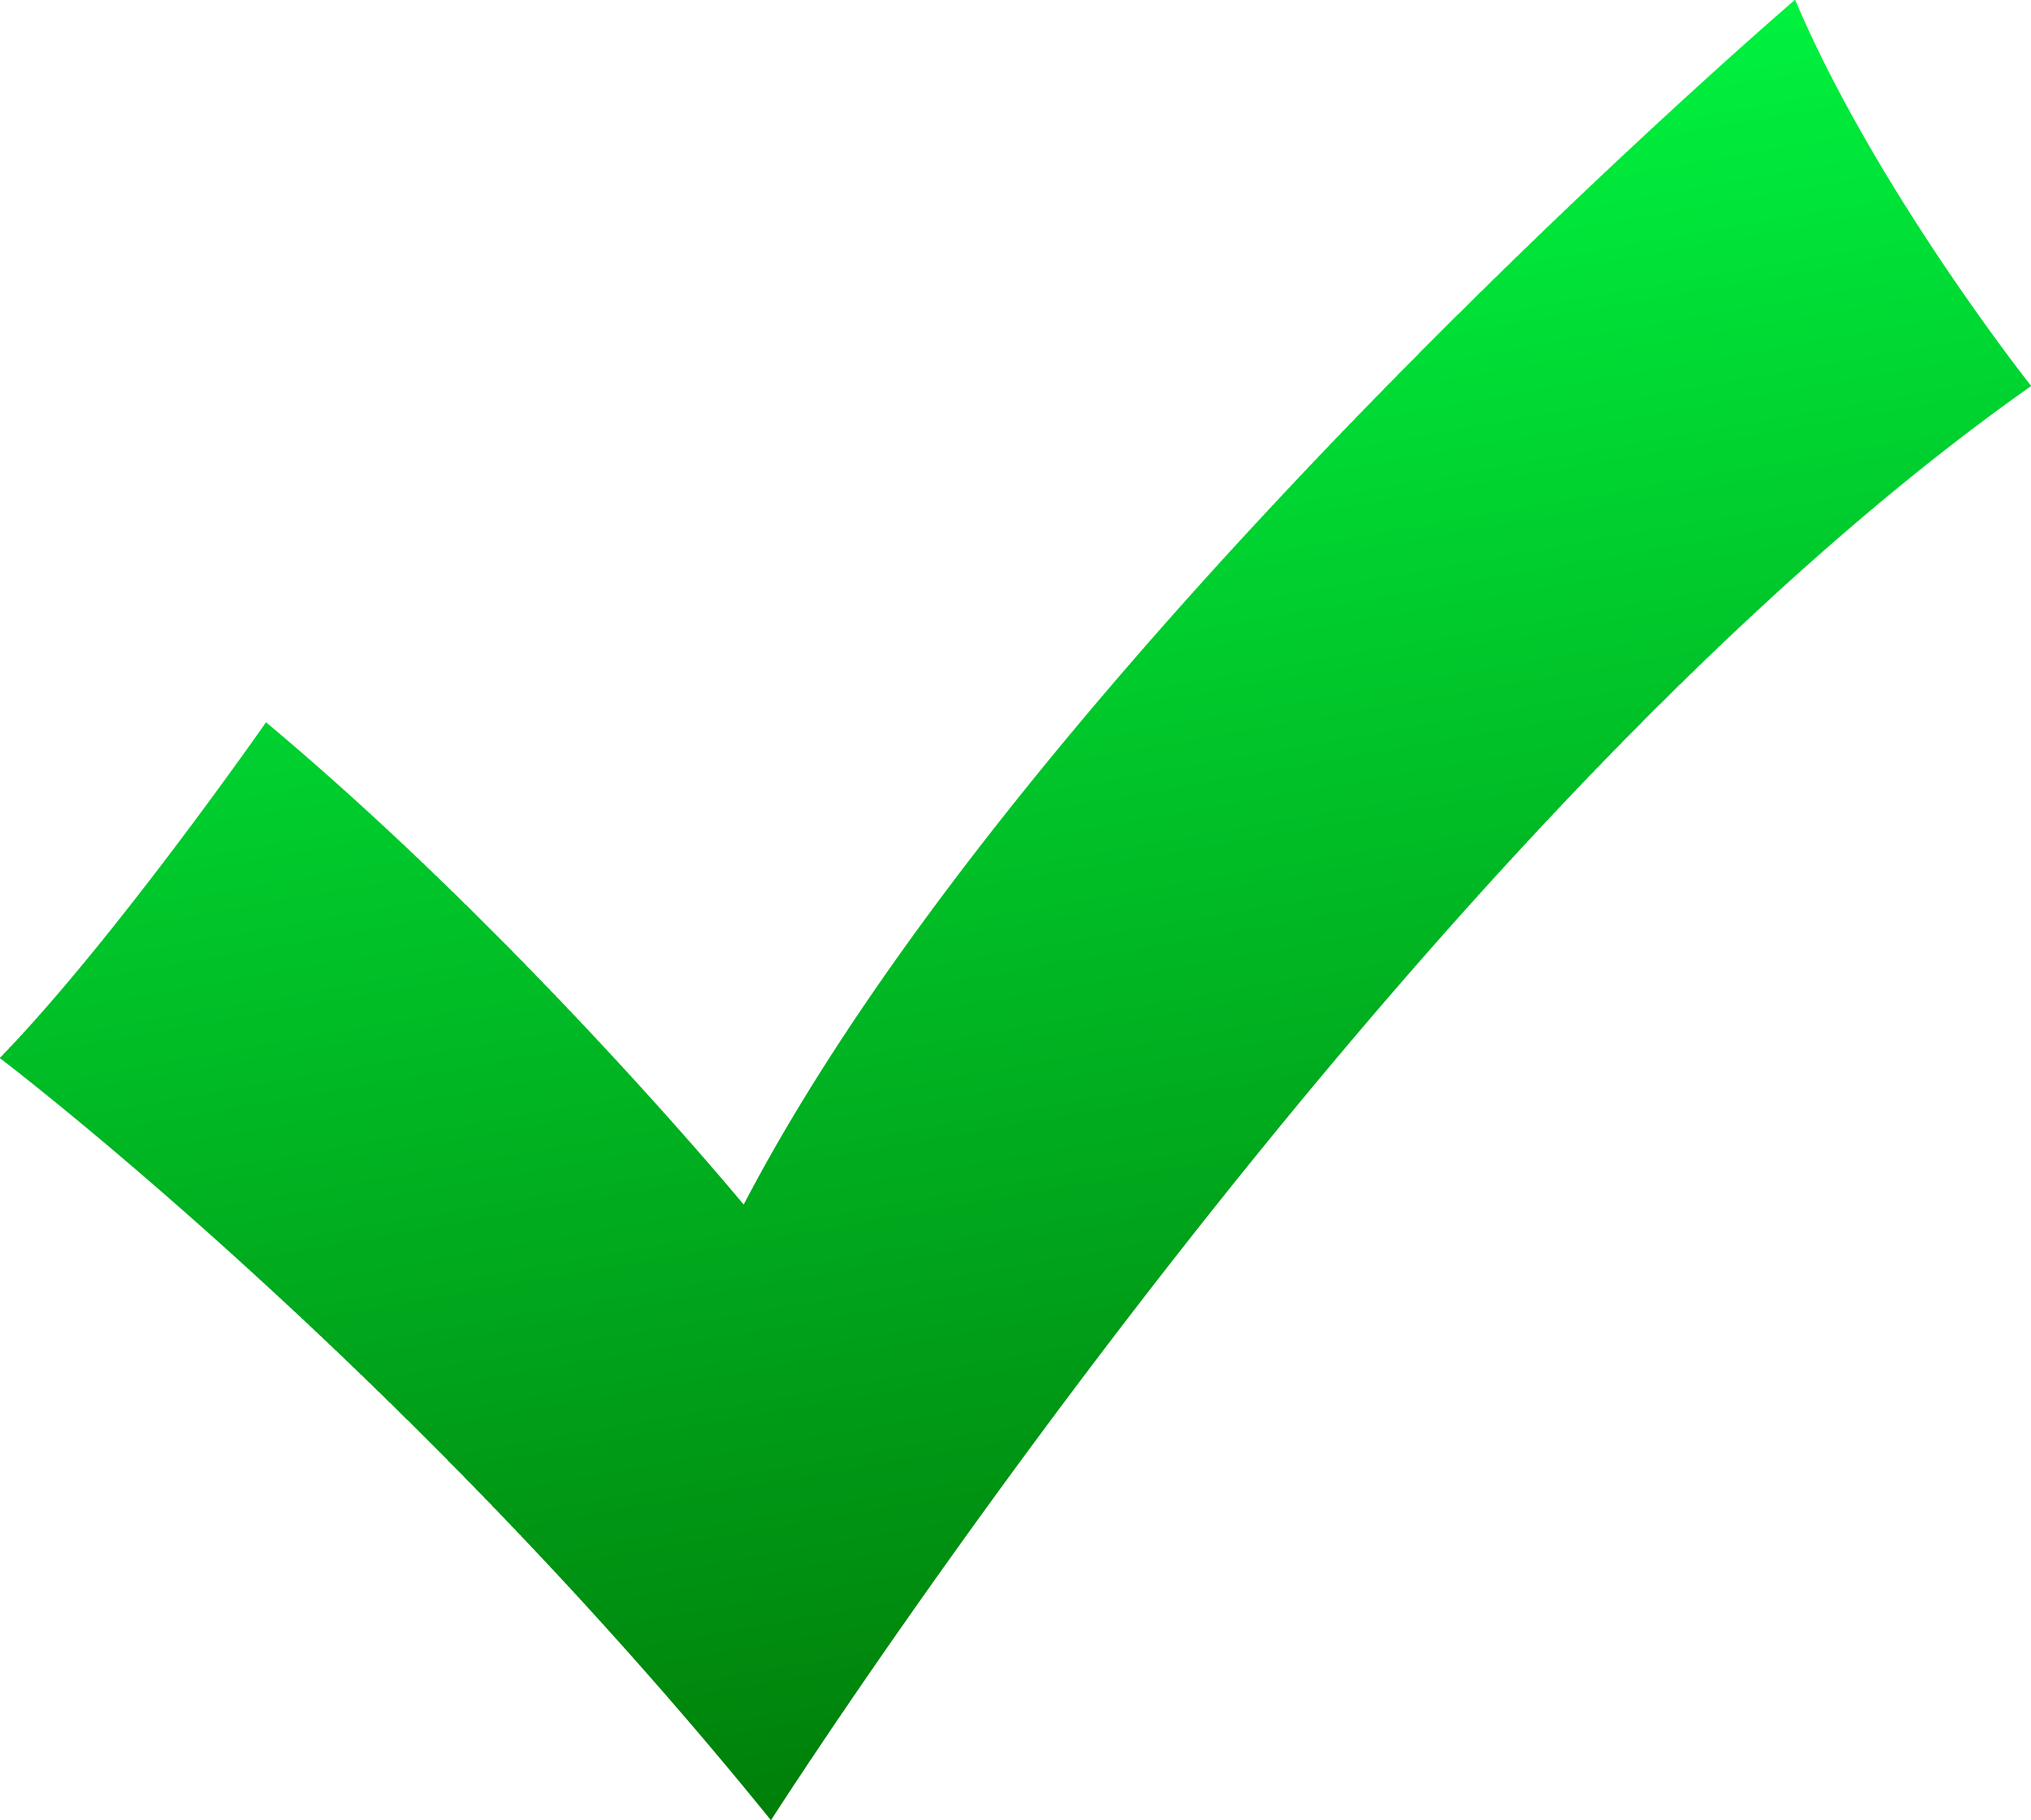 Green Tick Mark - Signifying Completeness and Success